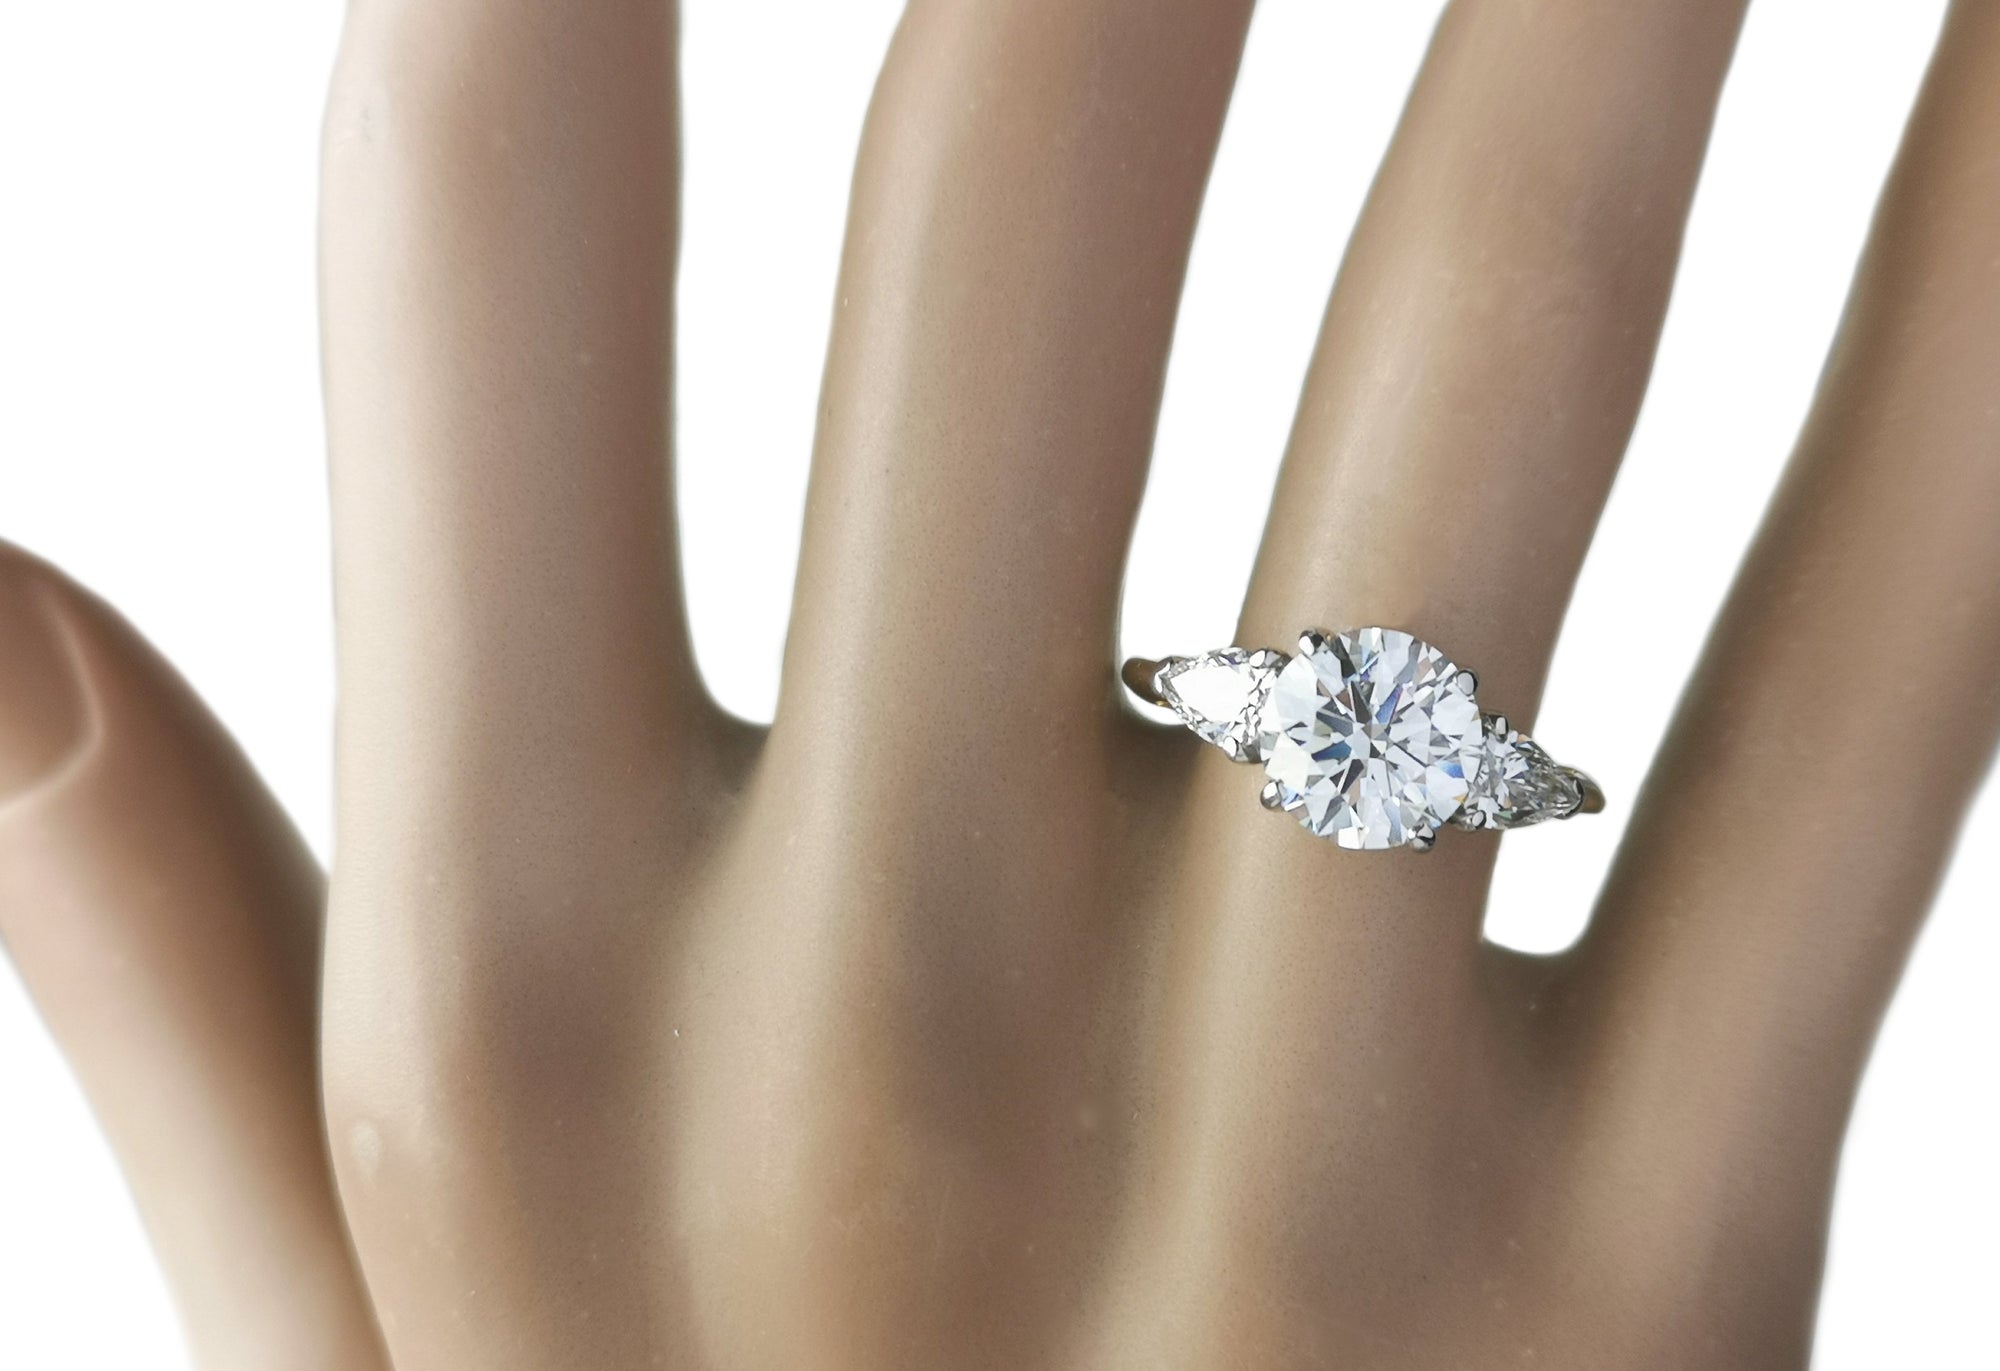 Tiffany & Co. 2.75tcw F/VS1 Three Stone Diamond Engagement Ring with Pear-shaped side stones on model hand